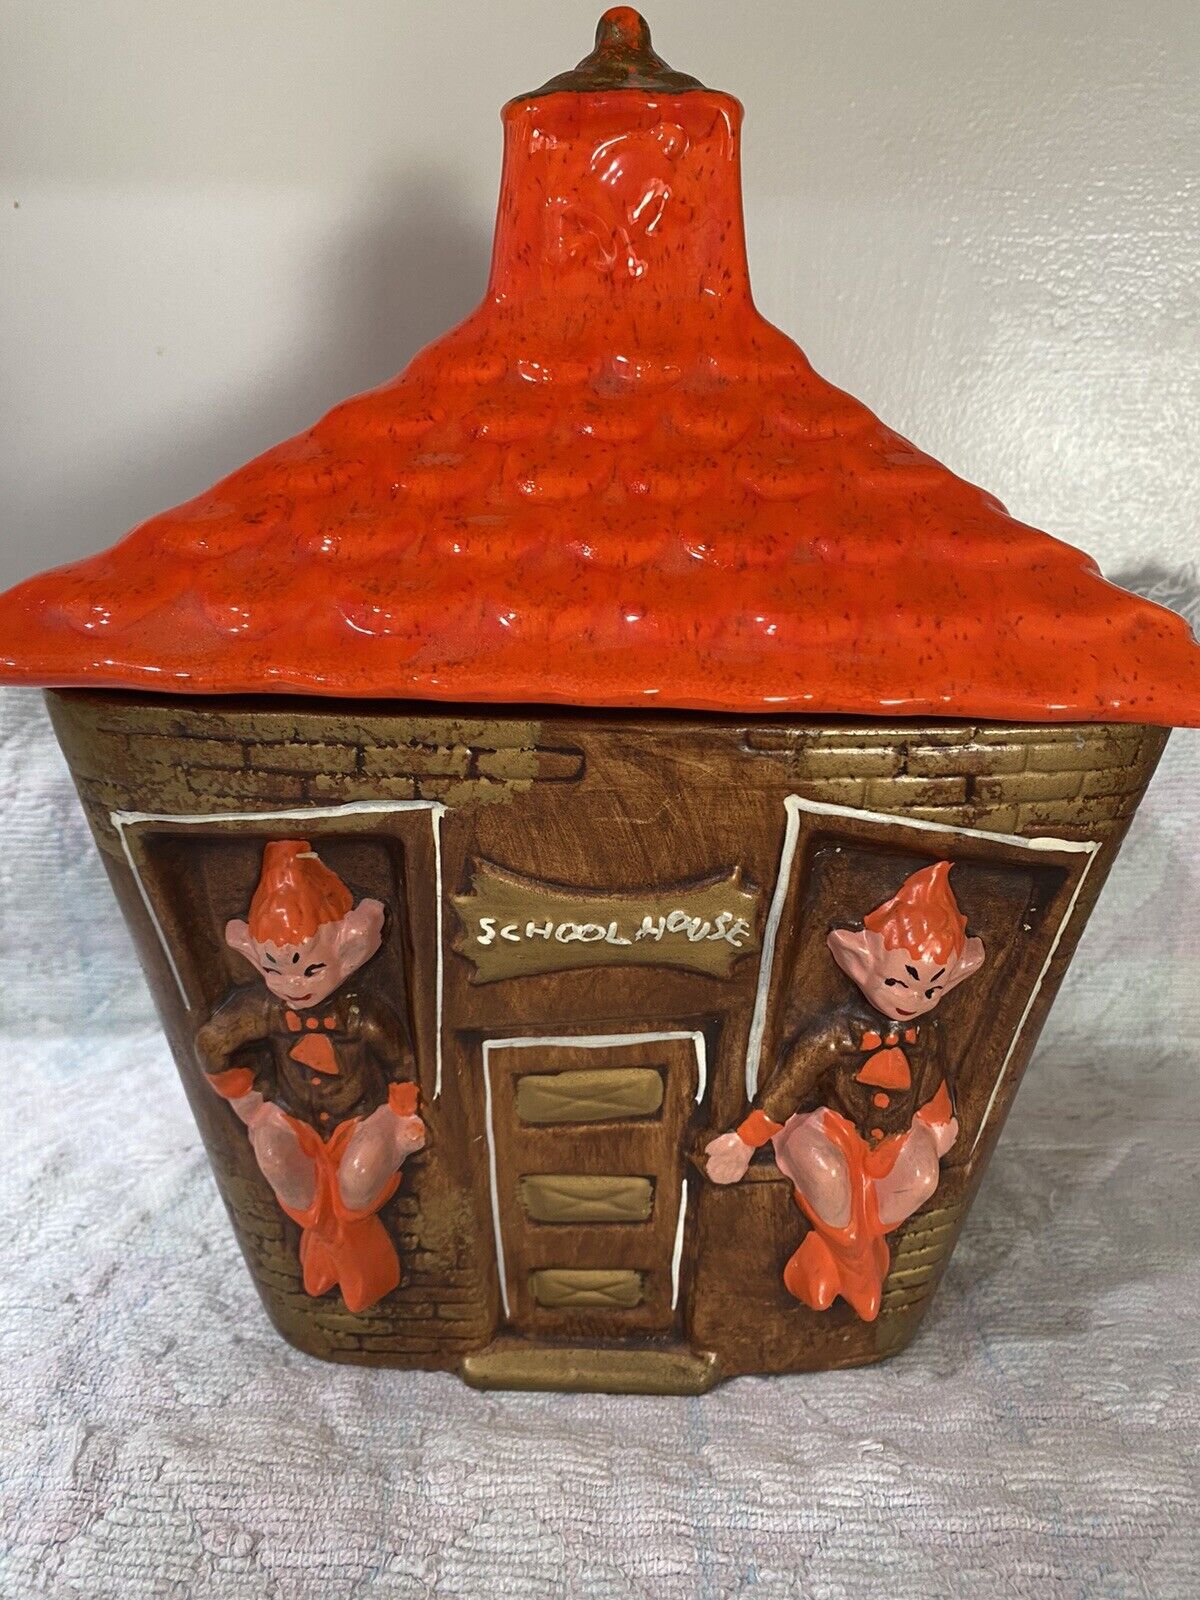 1970s Pixie Elf Schoolhouse Cookie Jar/Canister - Orange & Brown w/ Gold Accents